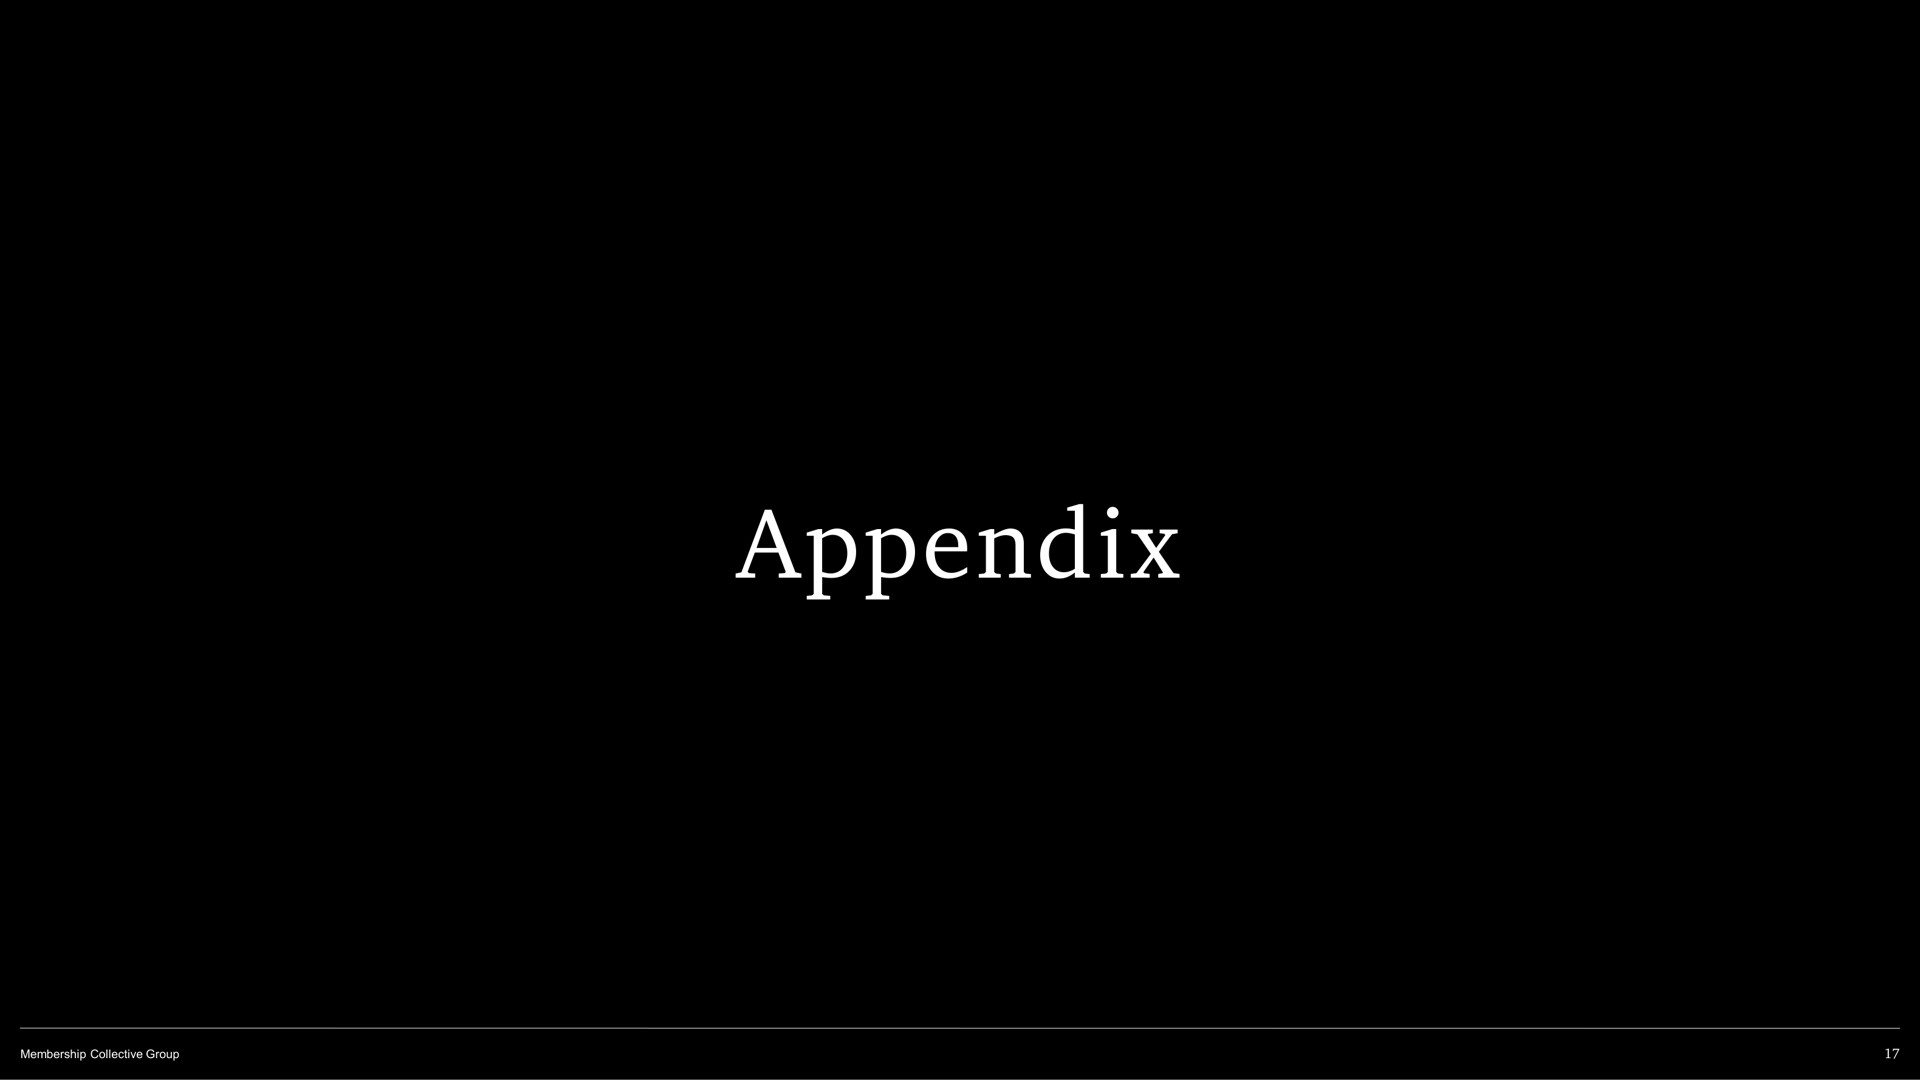 appendix | Membership Collective Group